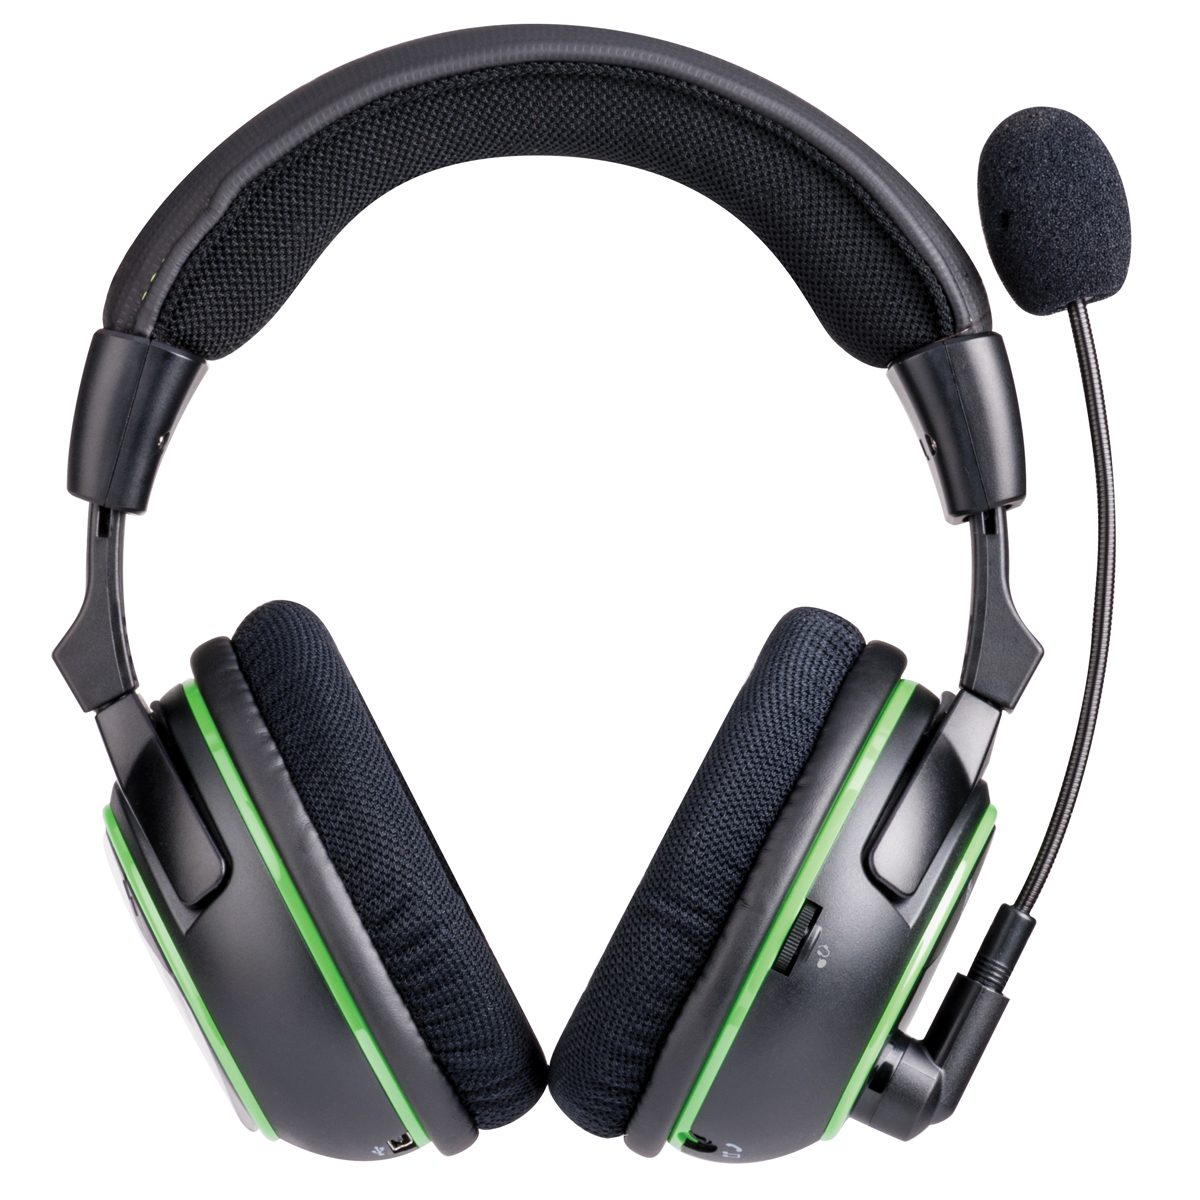 Turtle Beach Ear Force Stealth 500X Xbox One wireleless surround sound DTS Headphone:X review profile